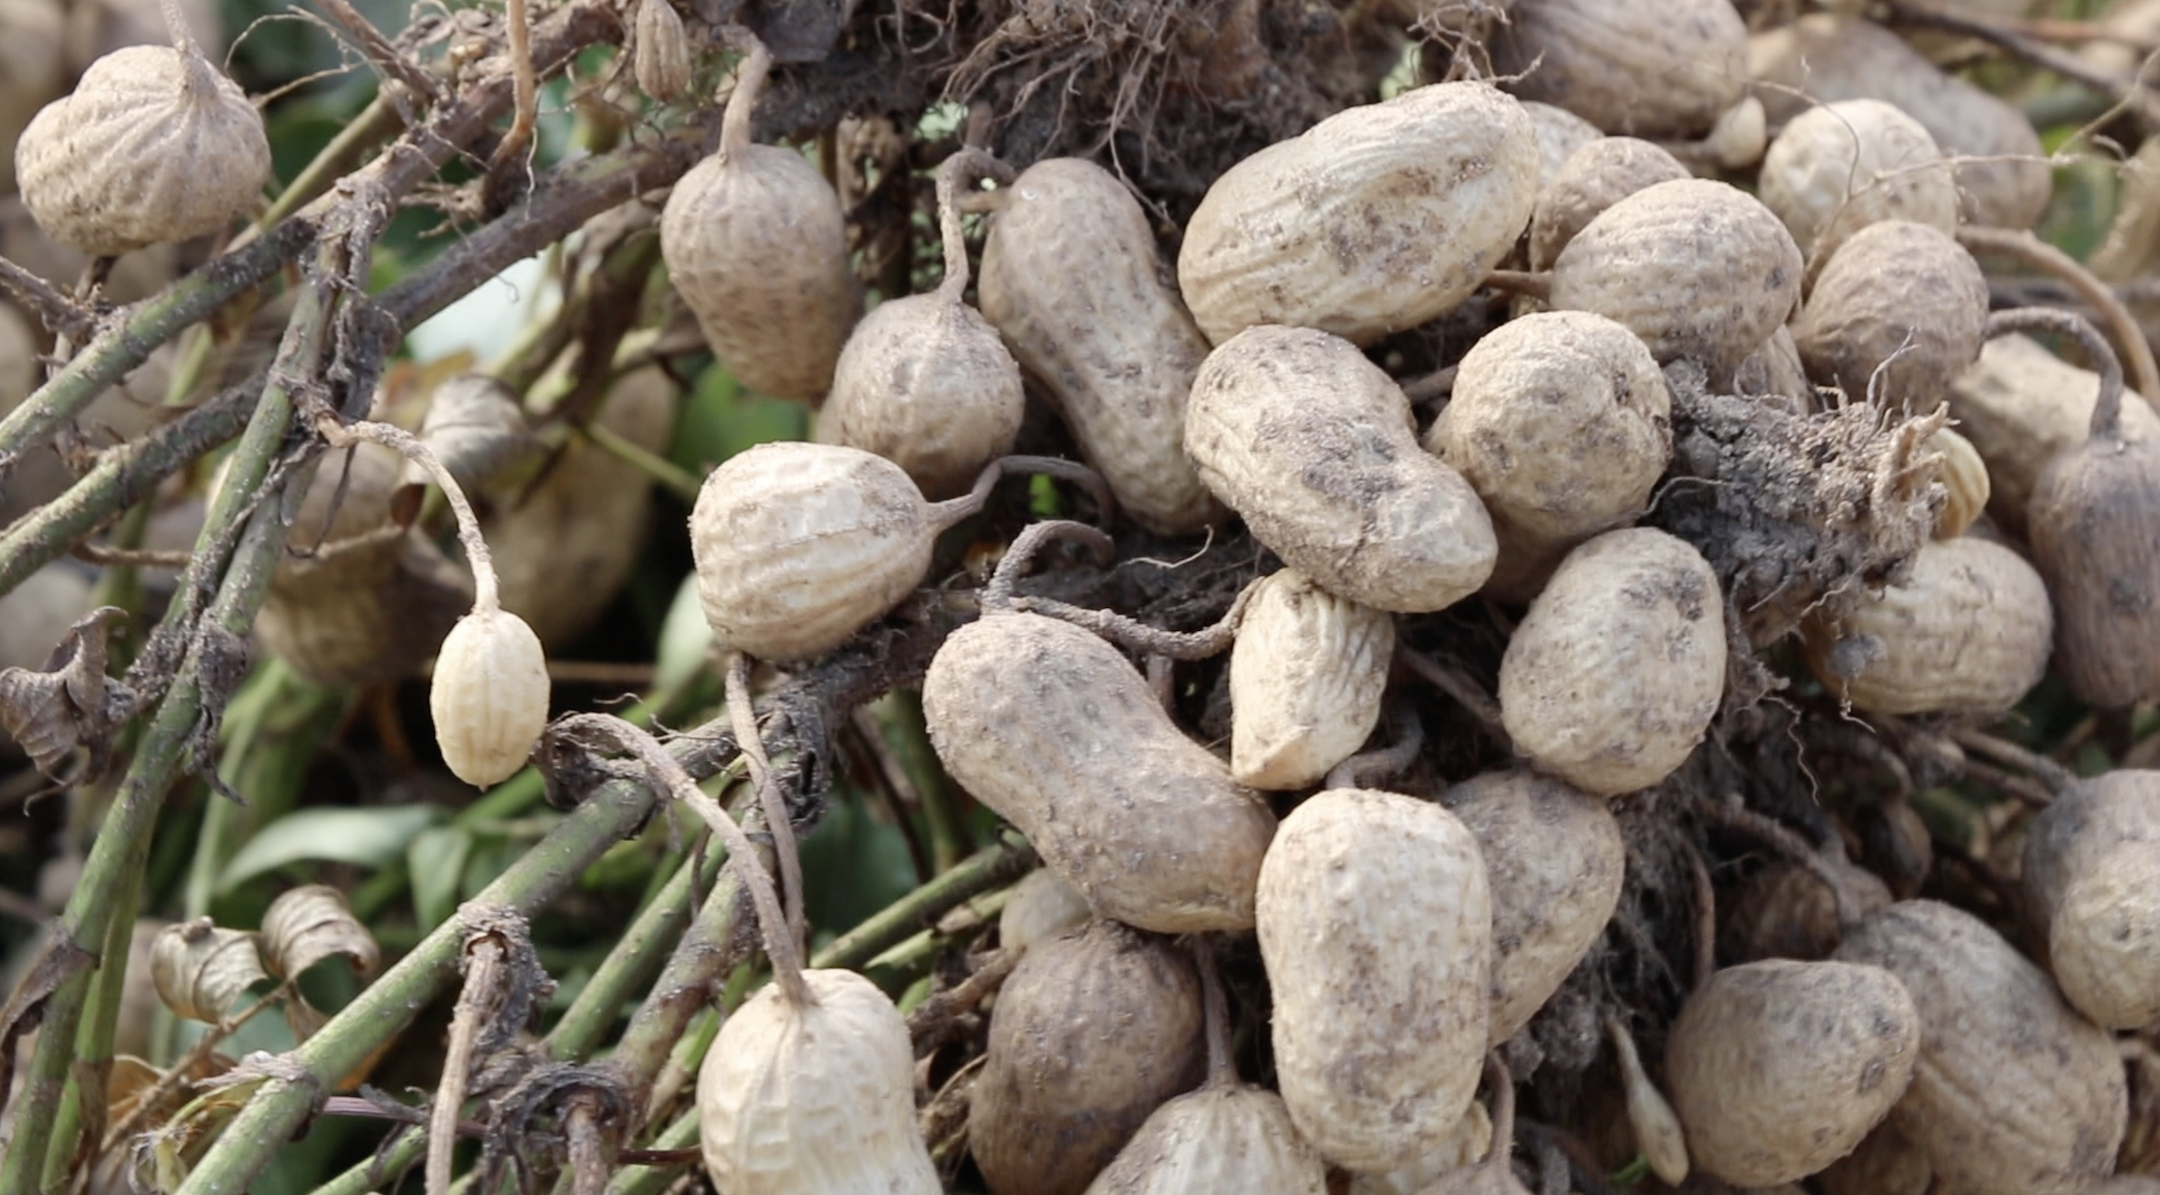 Dunklin County produces 10,000 acres of peanuts, making it the largest peanut producer in the state.